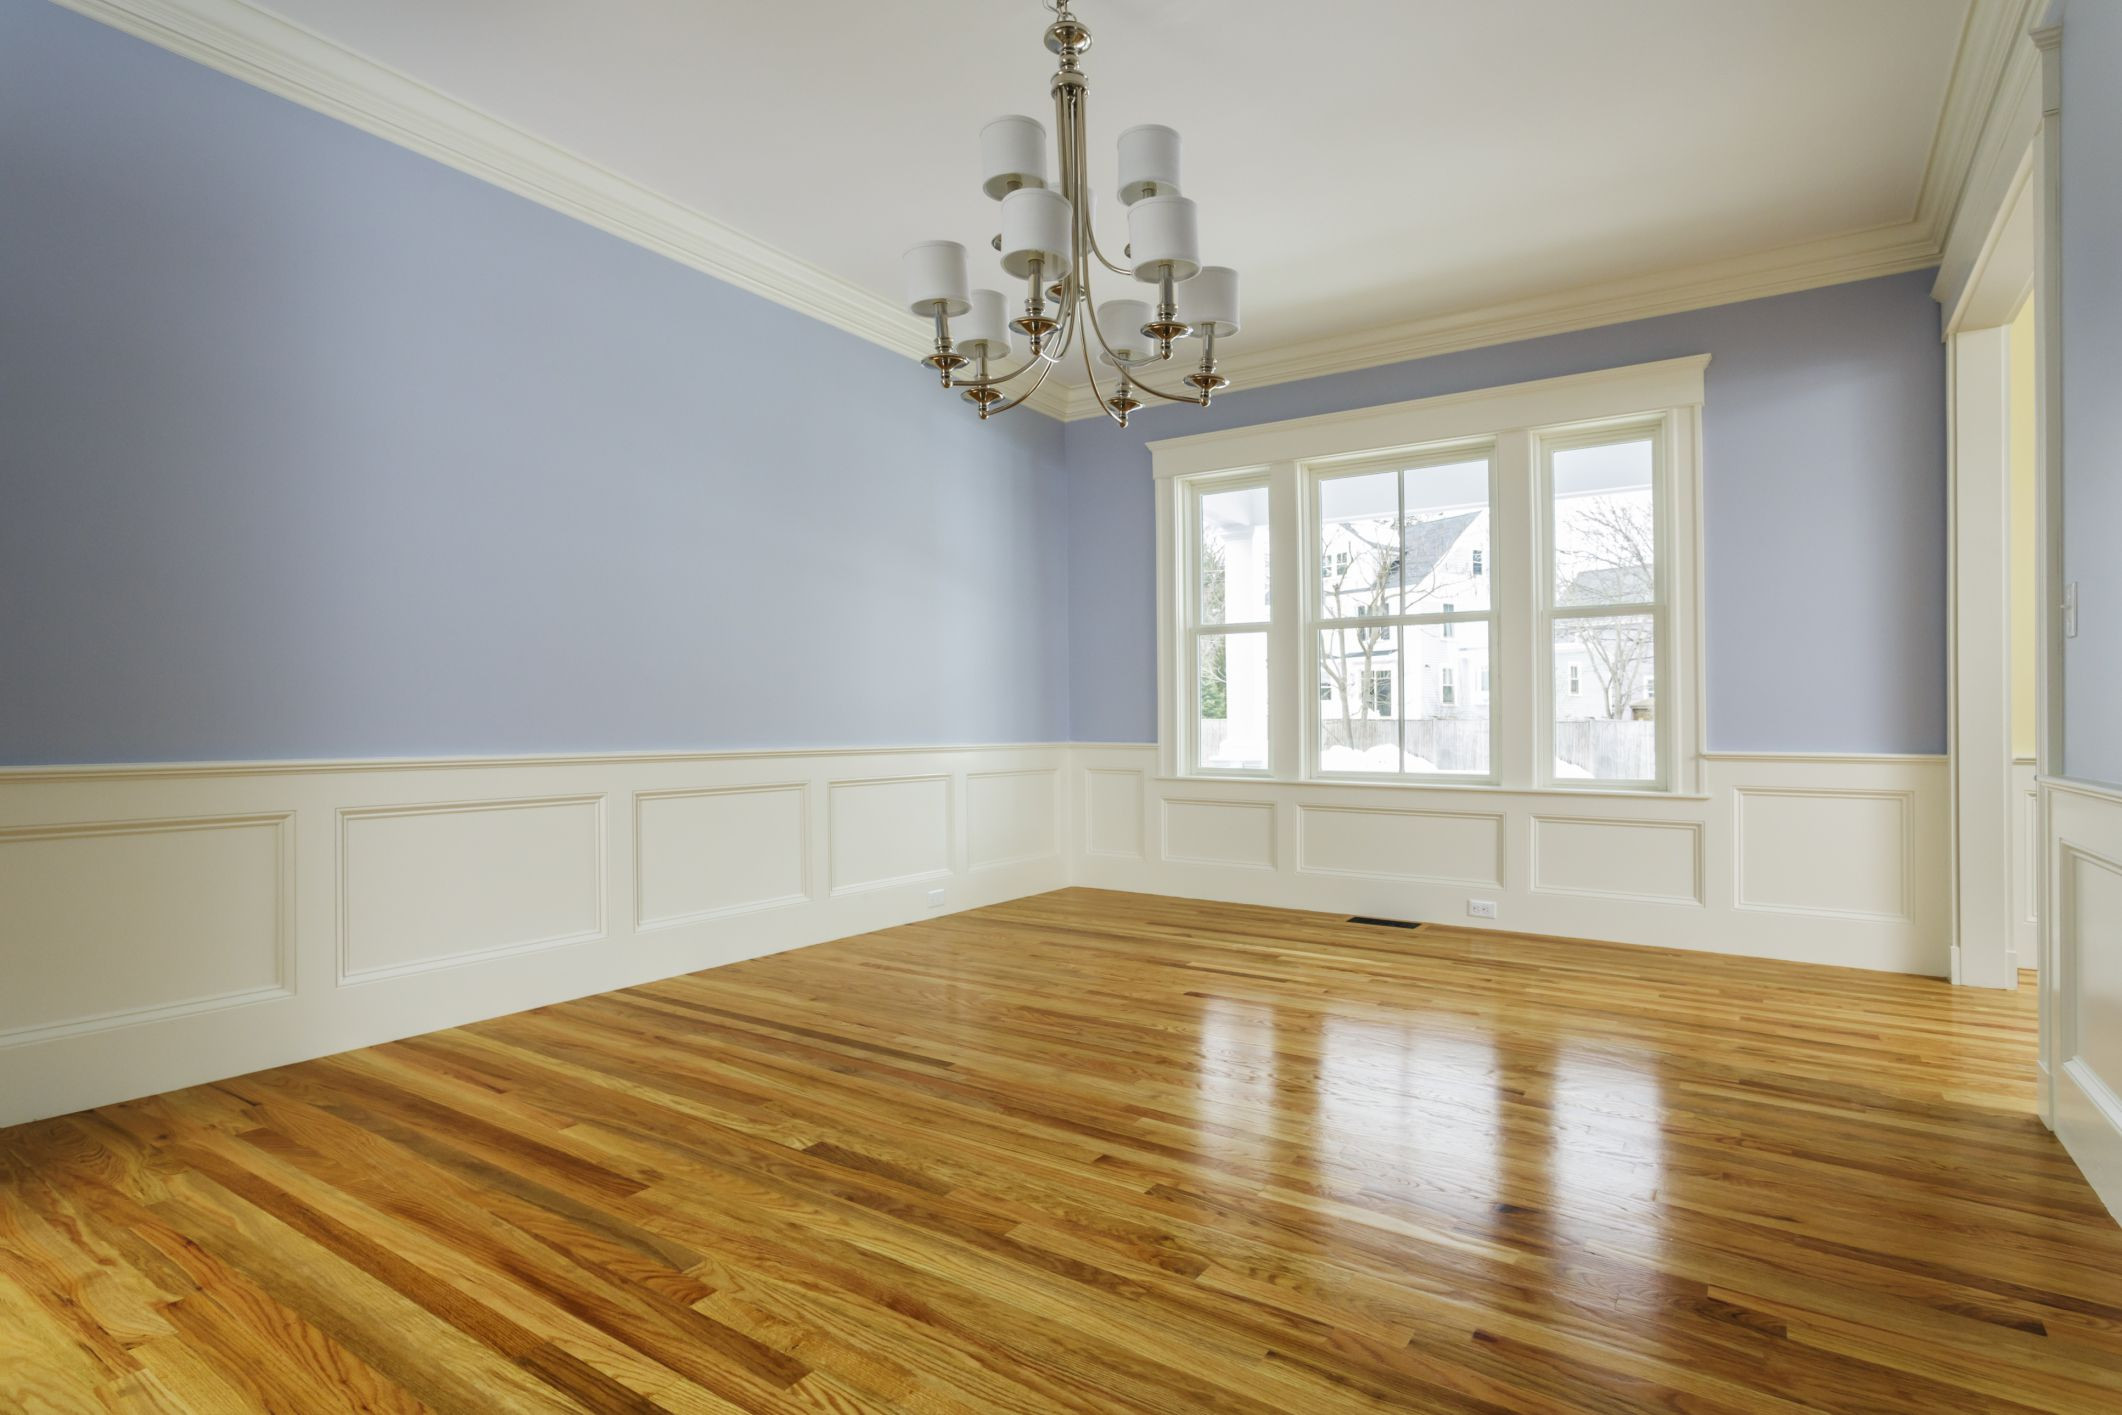 12 Best Hardwood Flooring Per Sq Ft Installed 2024 free download hardwood flooring per sq ft installed of the cost to refinish hardwood floors with 168686572 highres 56a2fd773df78cf7727b6cb3